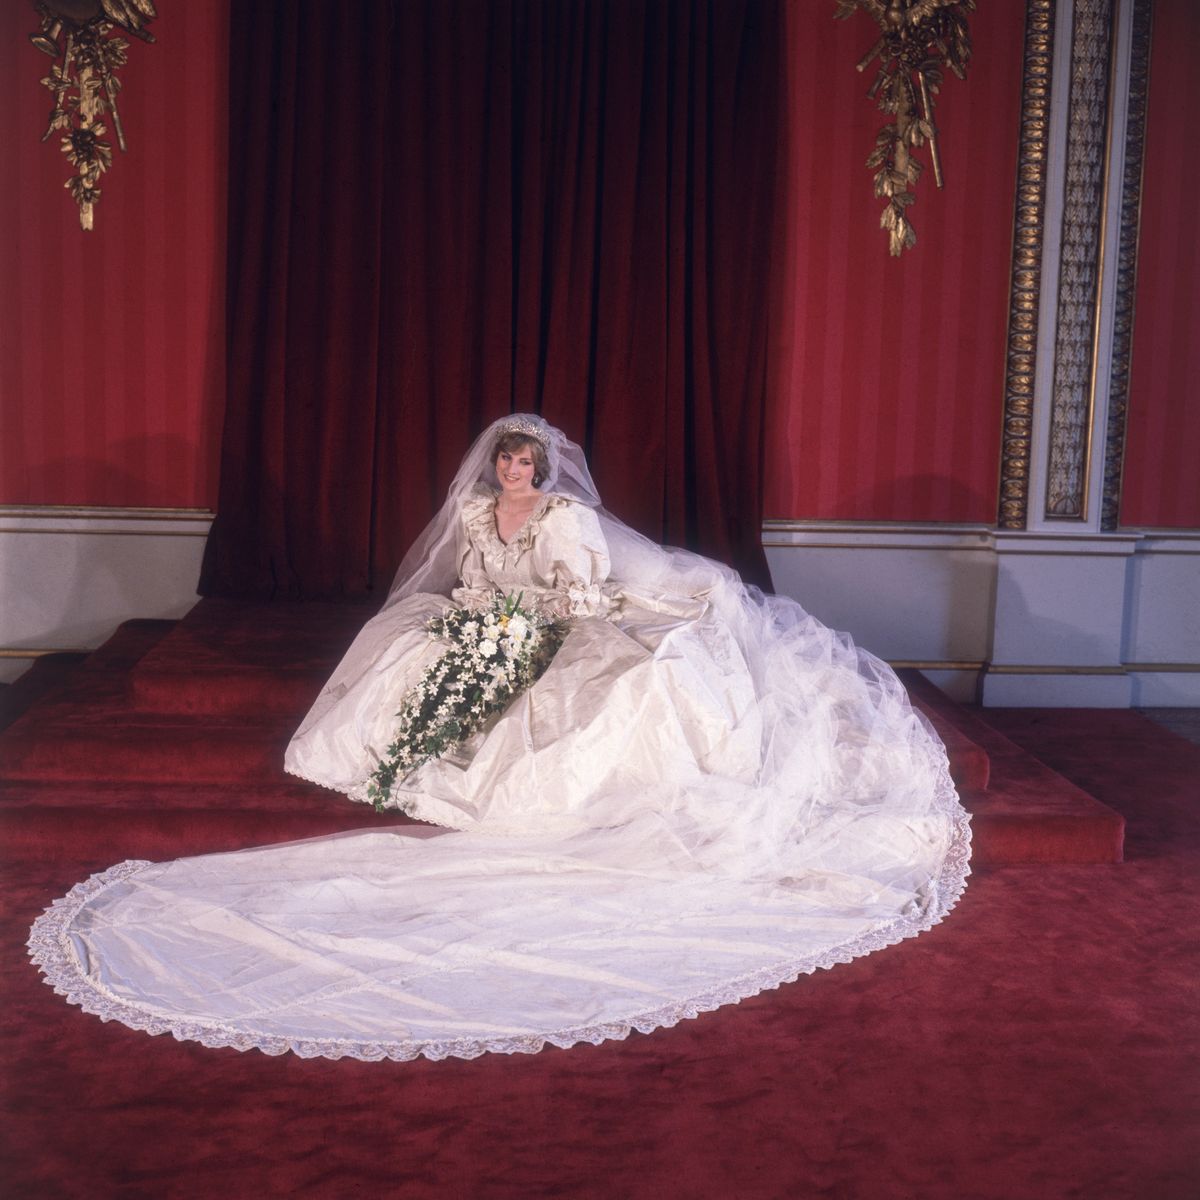 Princess Diana’s Wedding Dress: All The Details About the Royal’s Iconic Gown